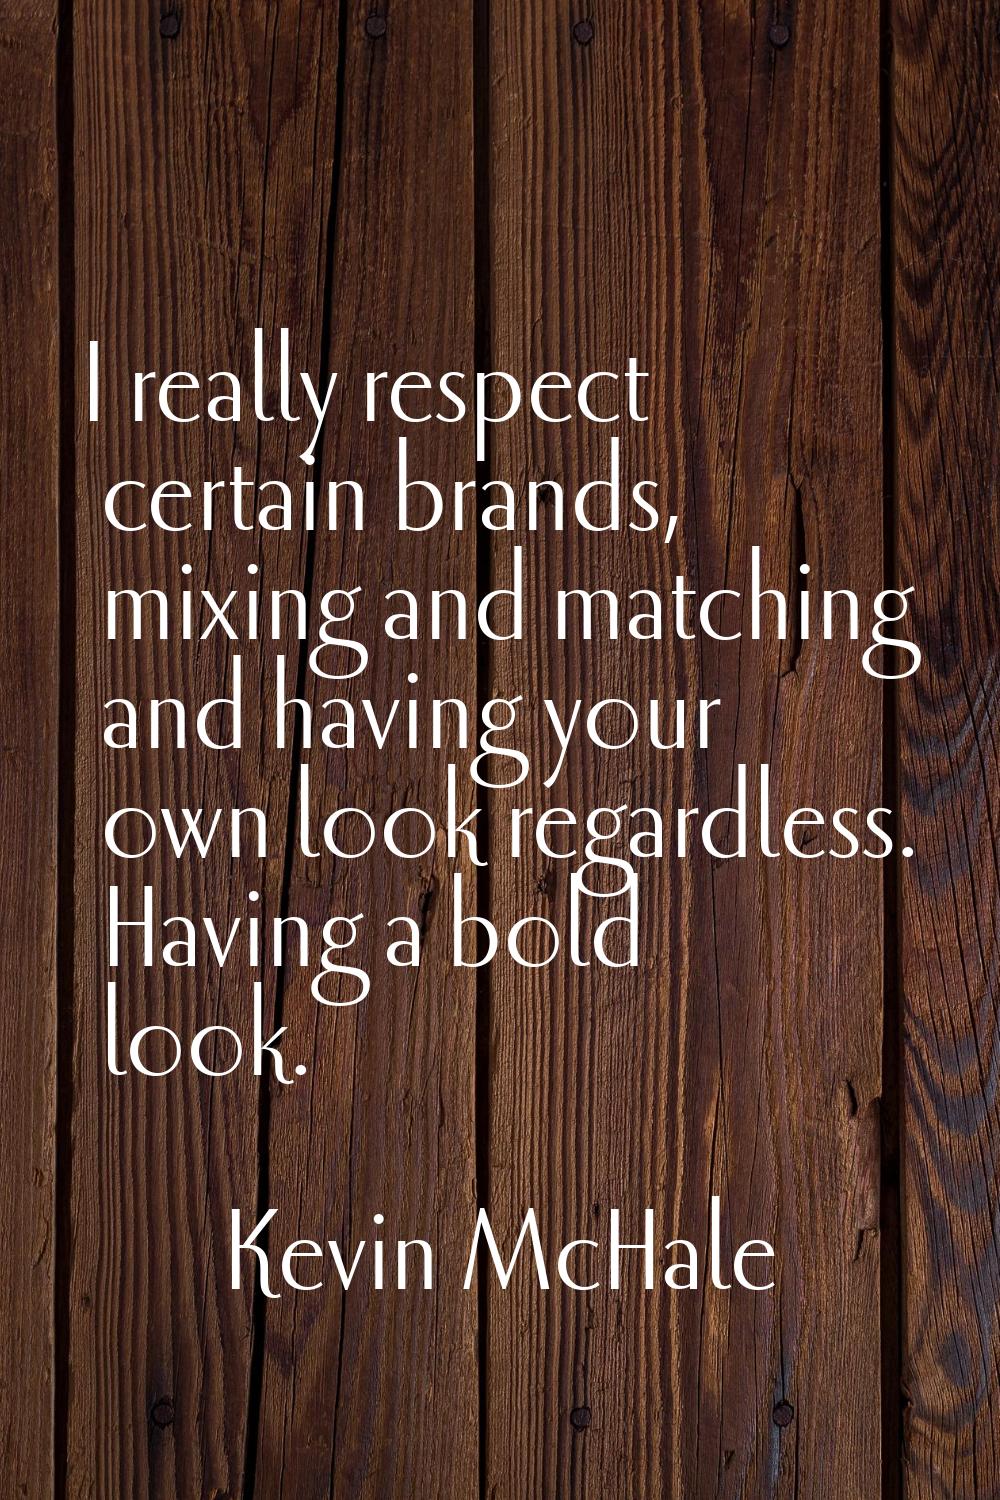 I really respect certain brands, mixing and matching and having your own look regardless. Having a 